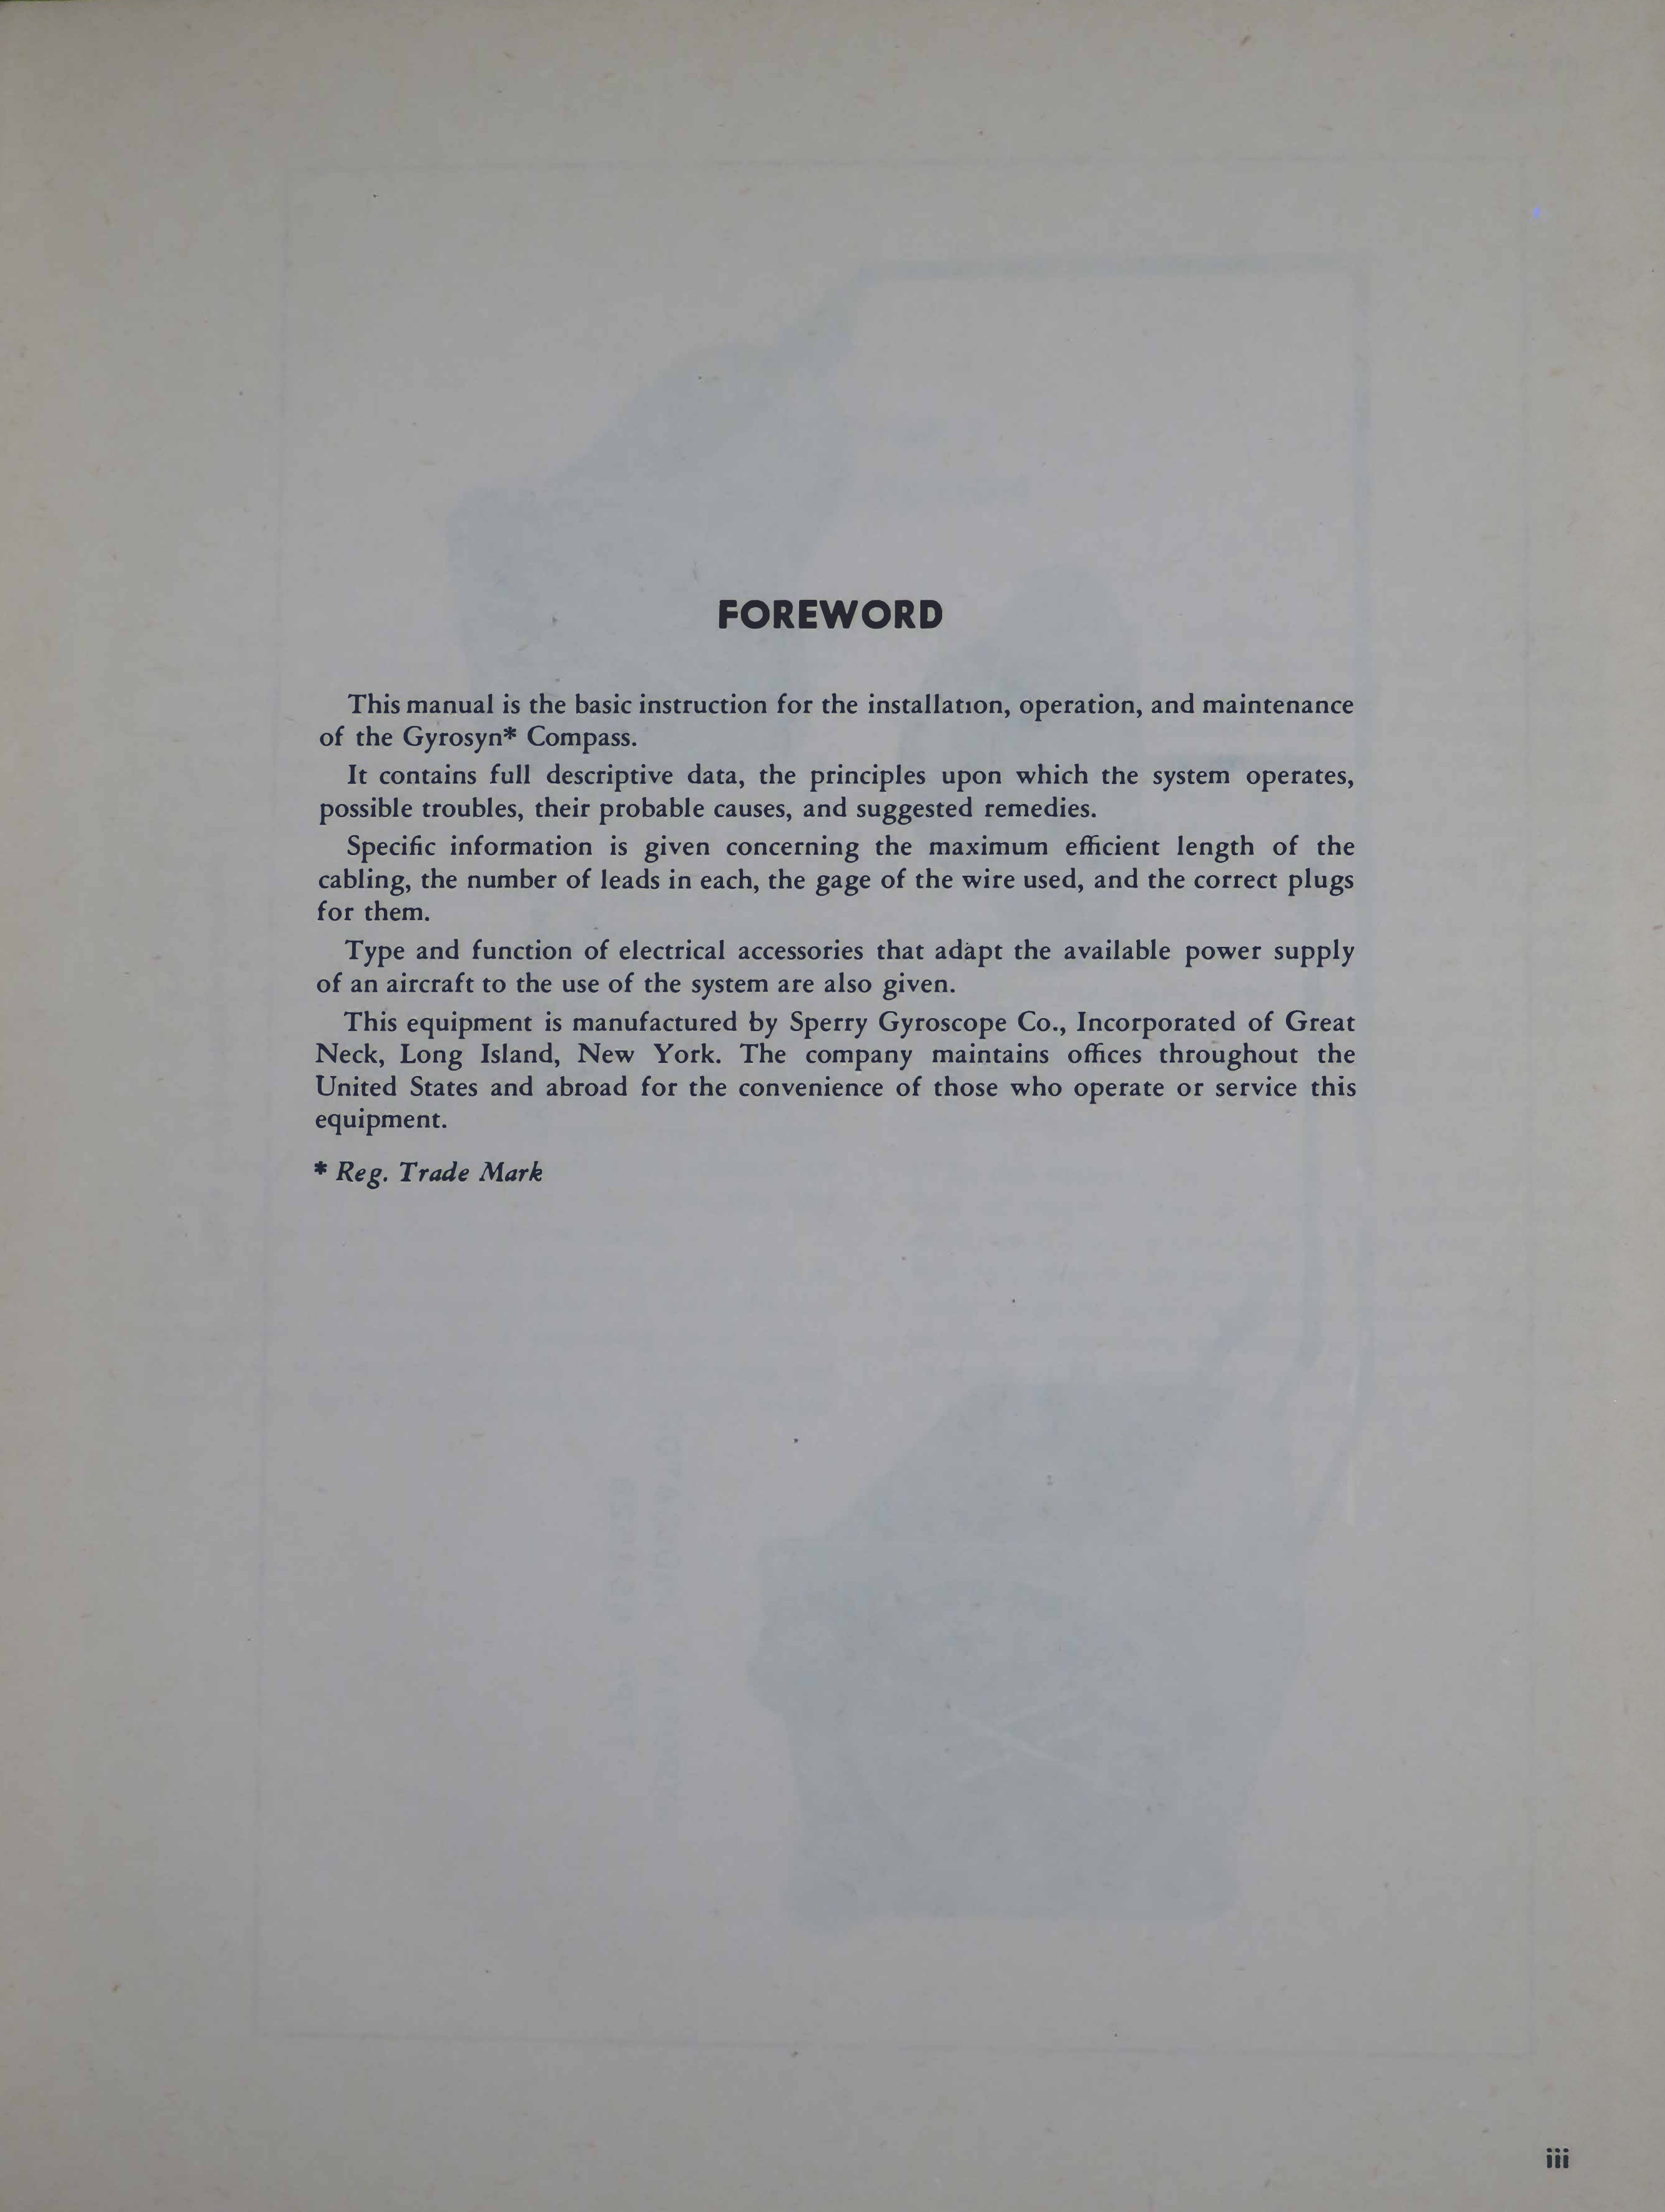 Sample page 5 from AirCorps Library document: Operation and Service Instructions for Gyrosyn Compass